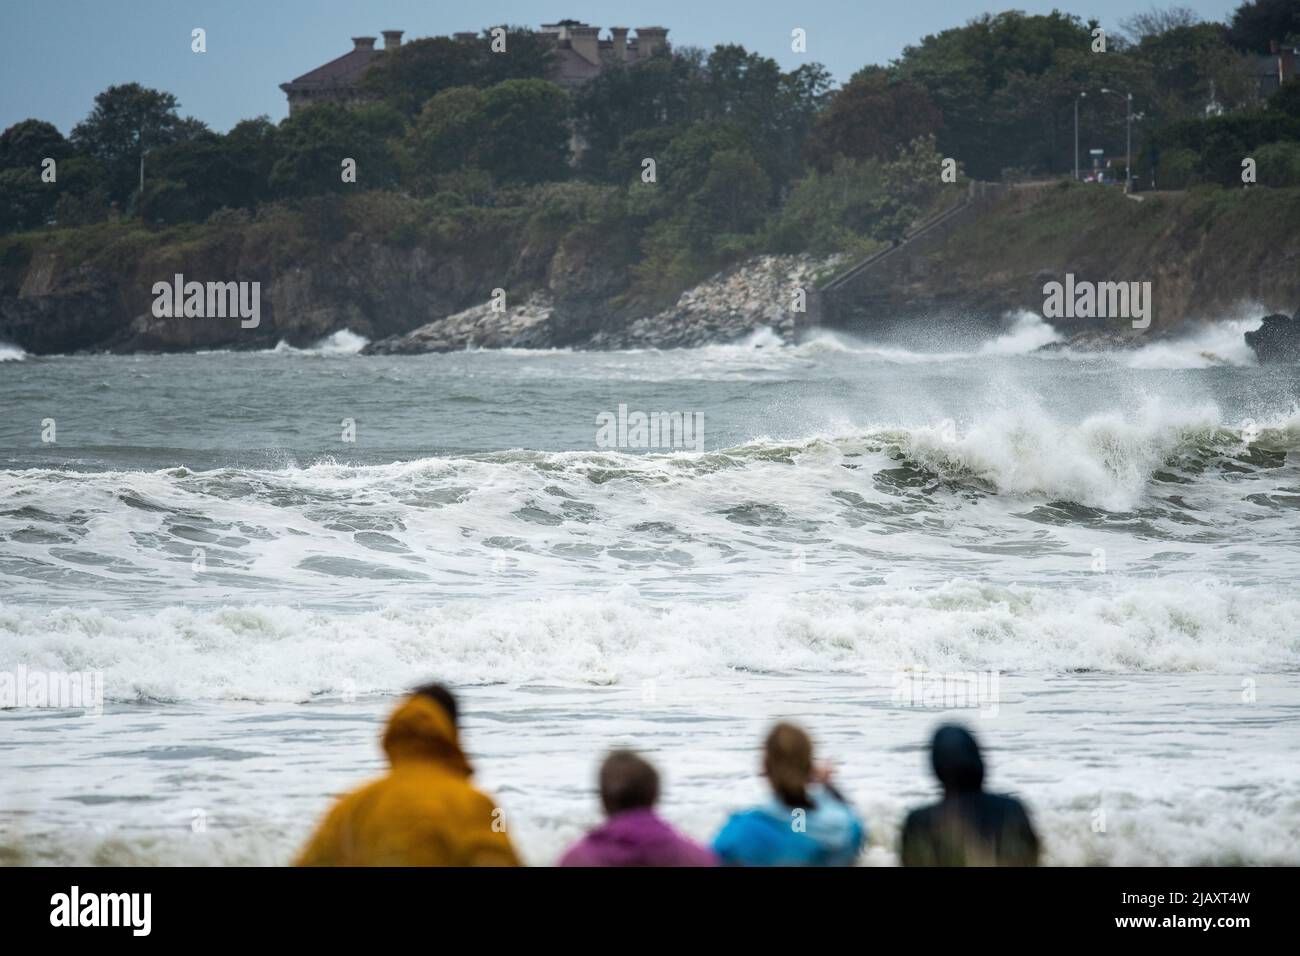 Stock photos of tropical storm Henri in 2021, Newport, RI. Stock photos of hurricane. Stock photos of extreme weather. Family at beach in a storm. Stock Photo